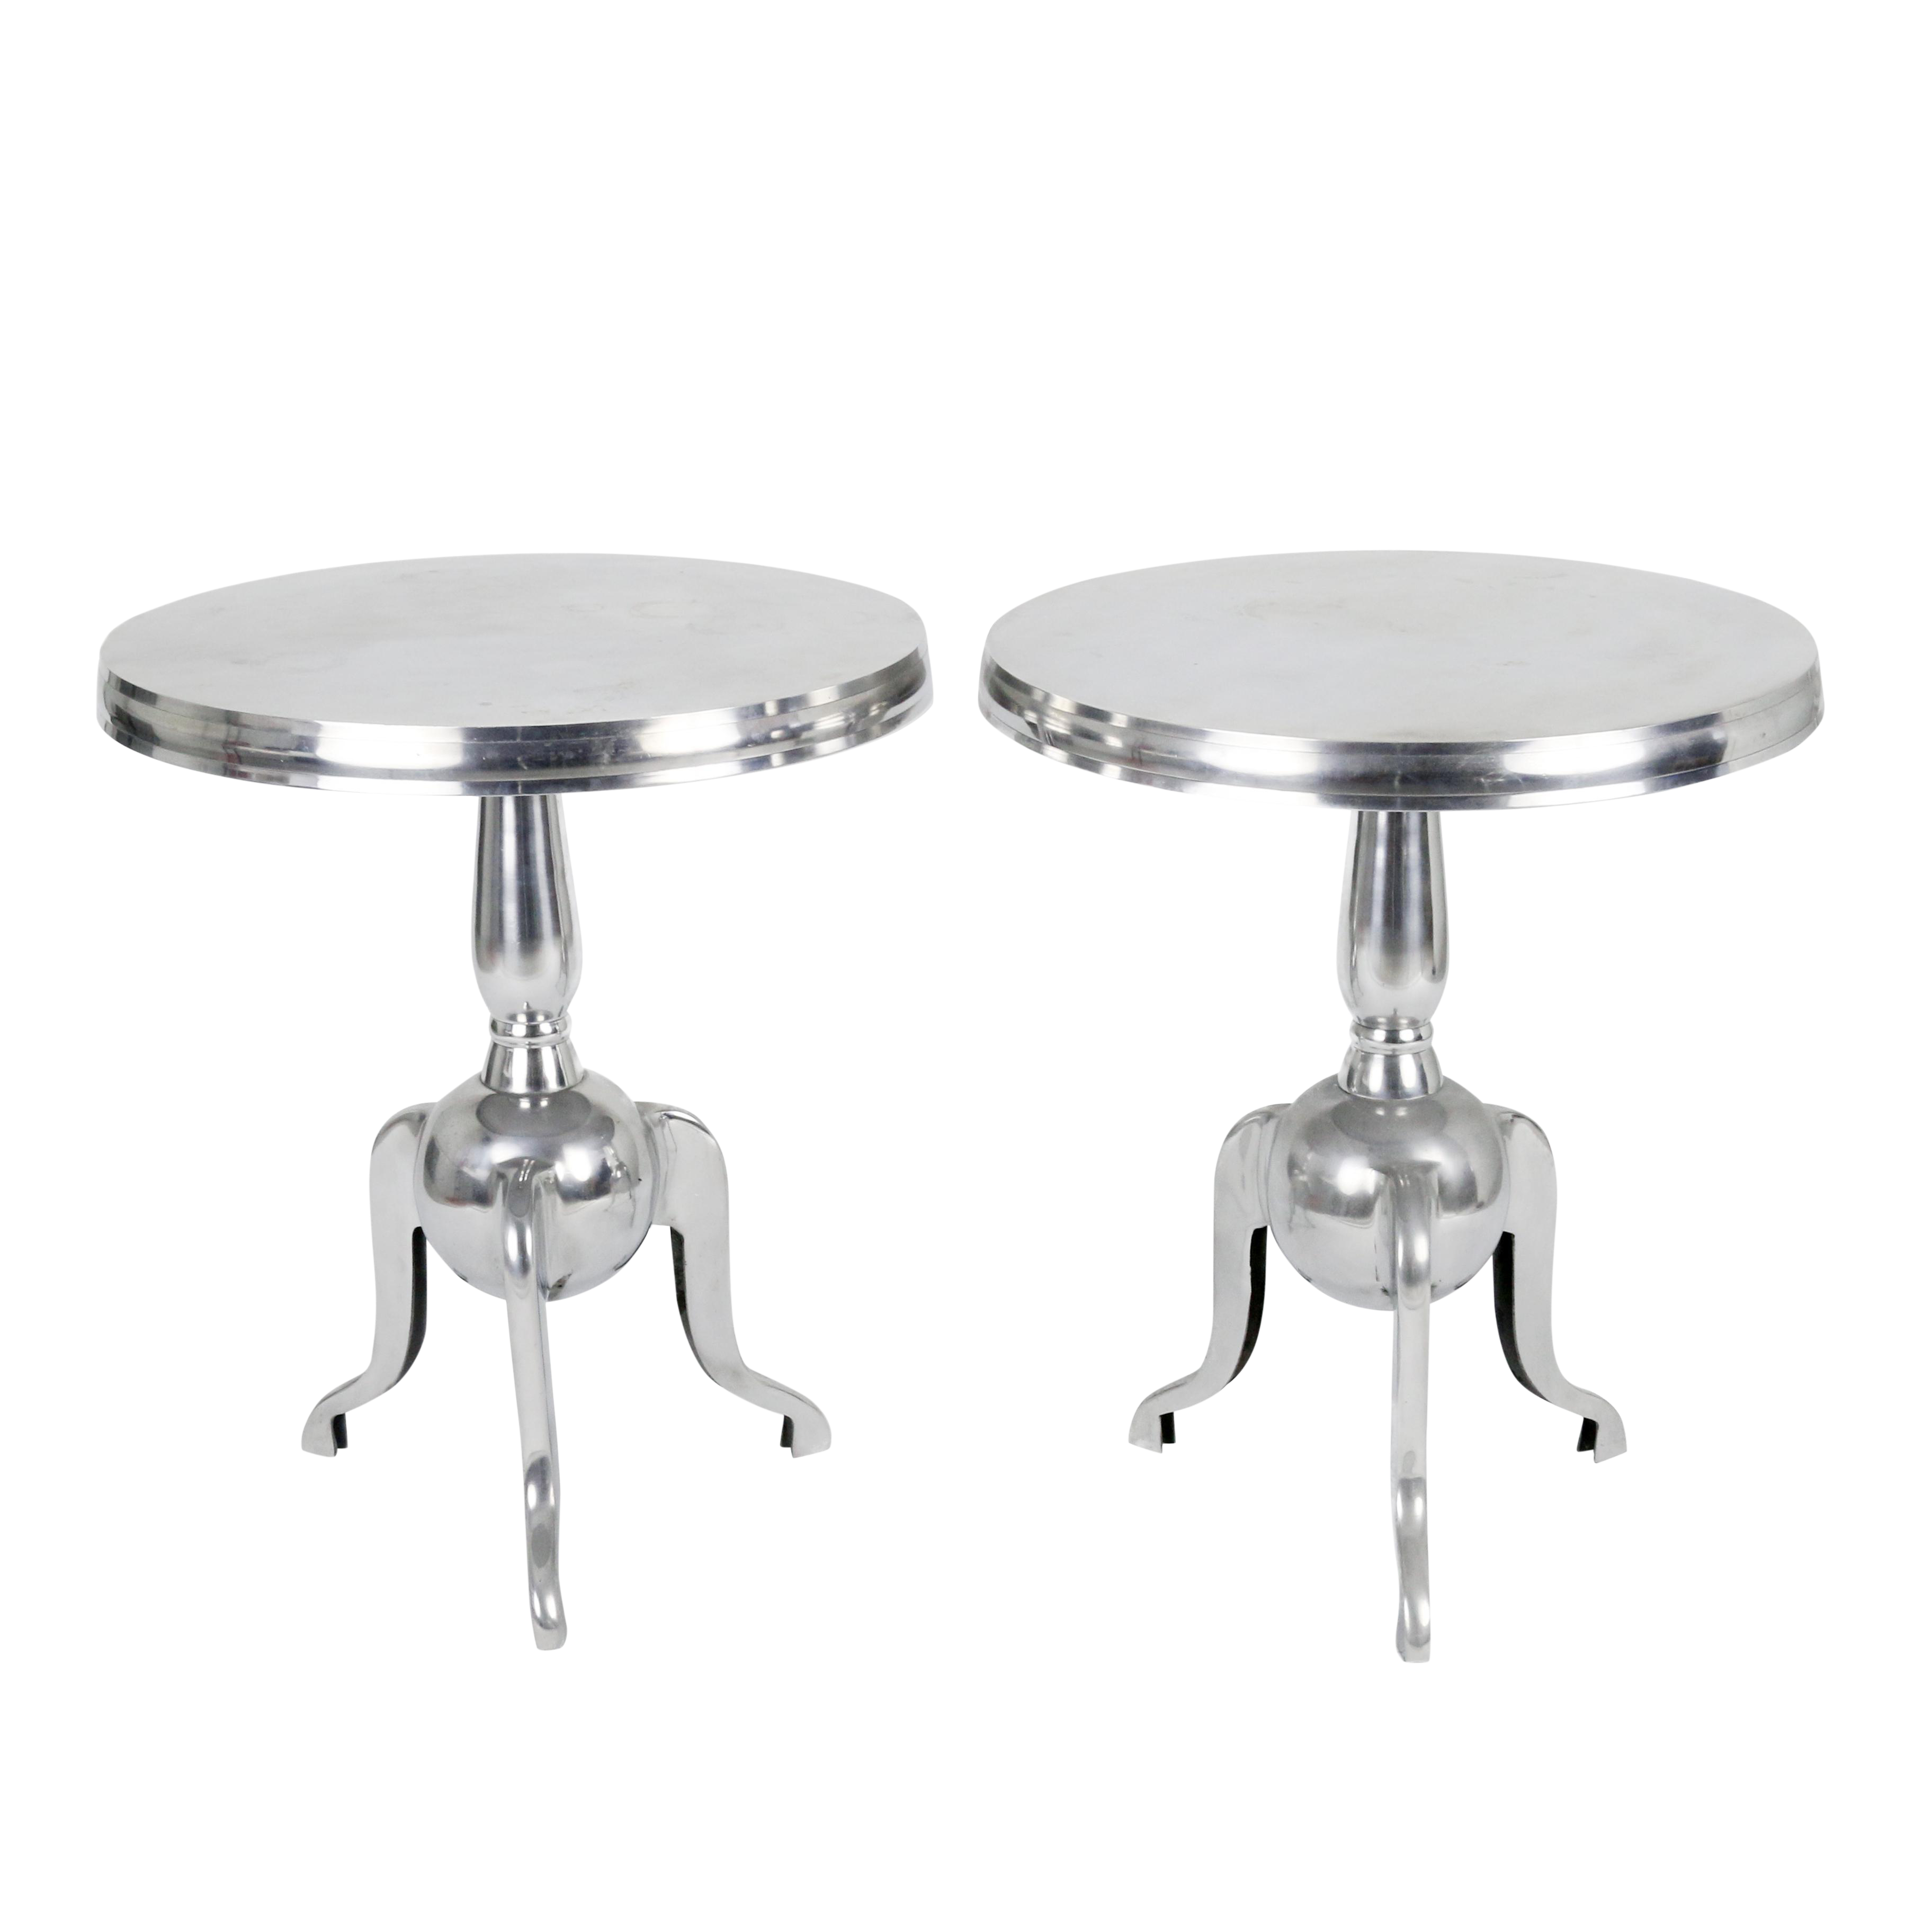 pottery barn silver aluminum pedestal accent tables pair chairish metal table nesting wood square legs furniture nest vintage sofa designs plans lamp black cube end narrow